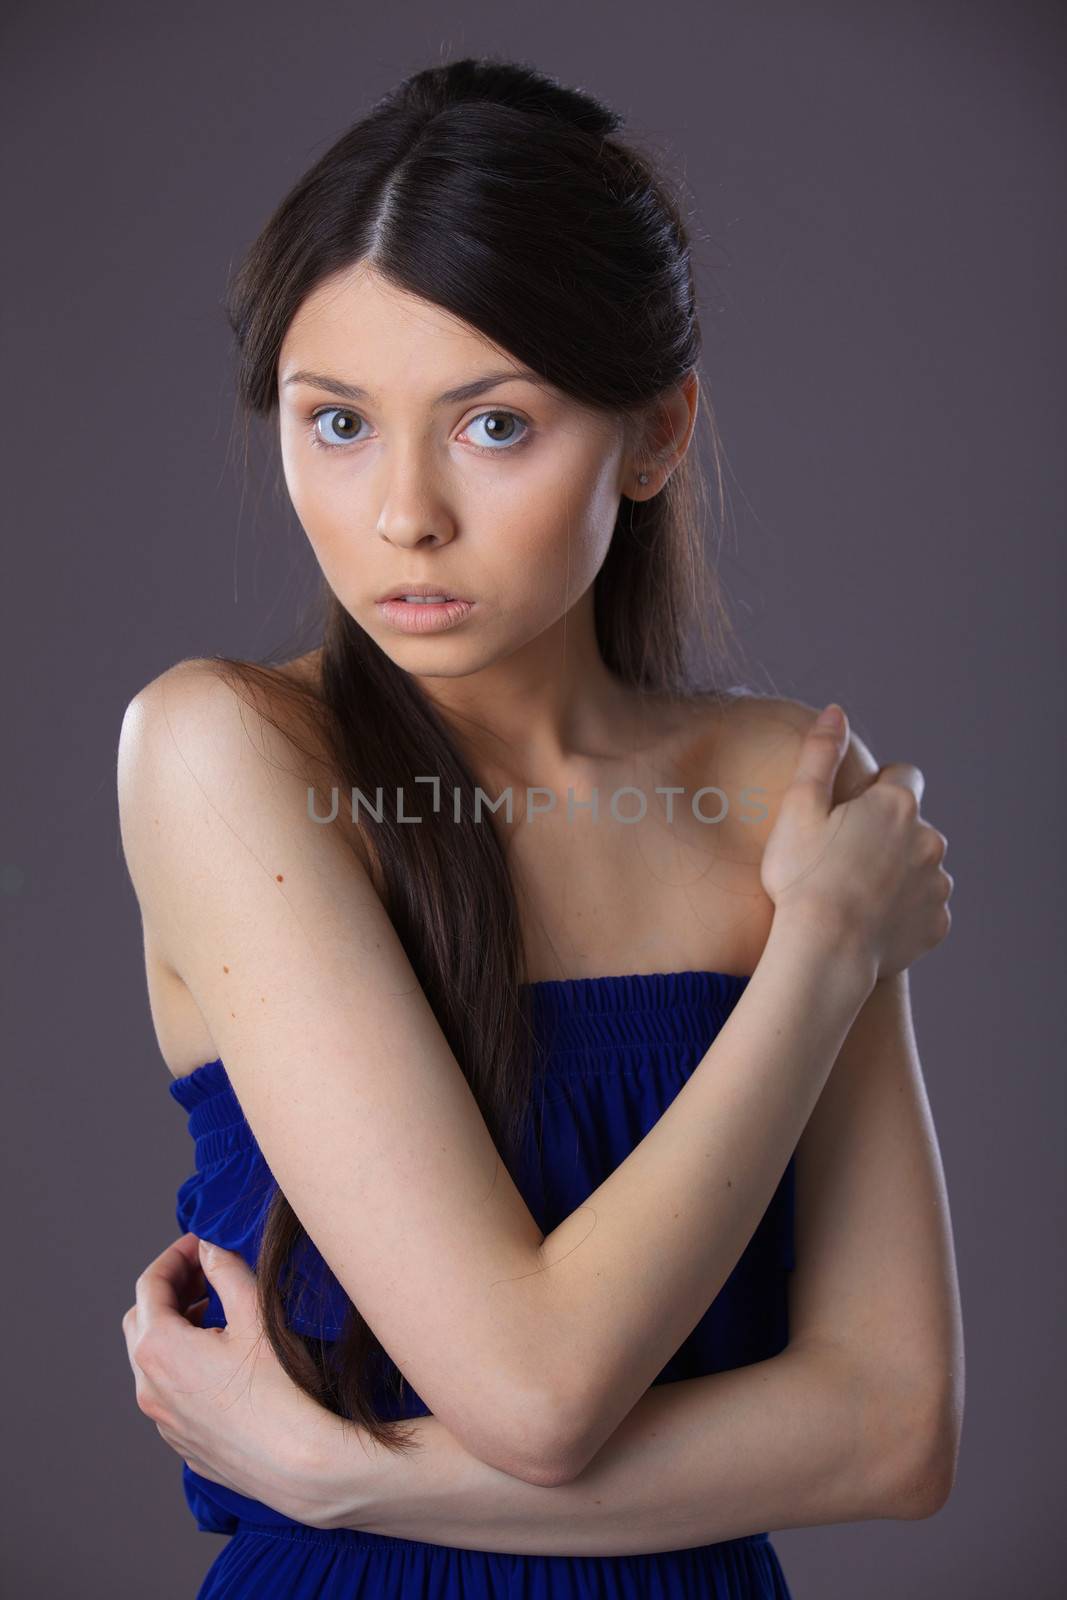 Glamour portrait of beautiful woman model with fresh daily makeup and romantic hairstyle.